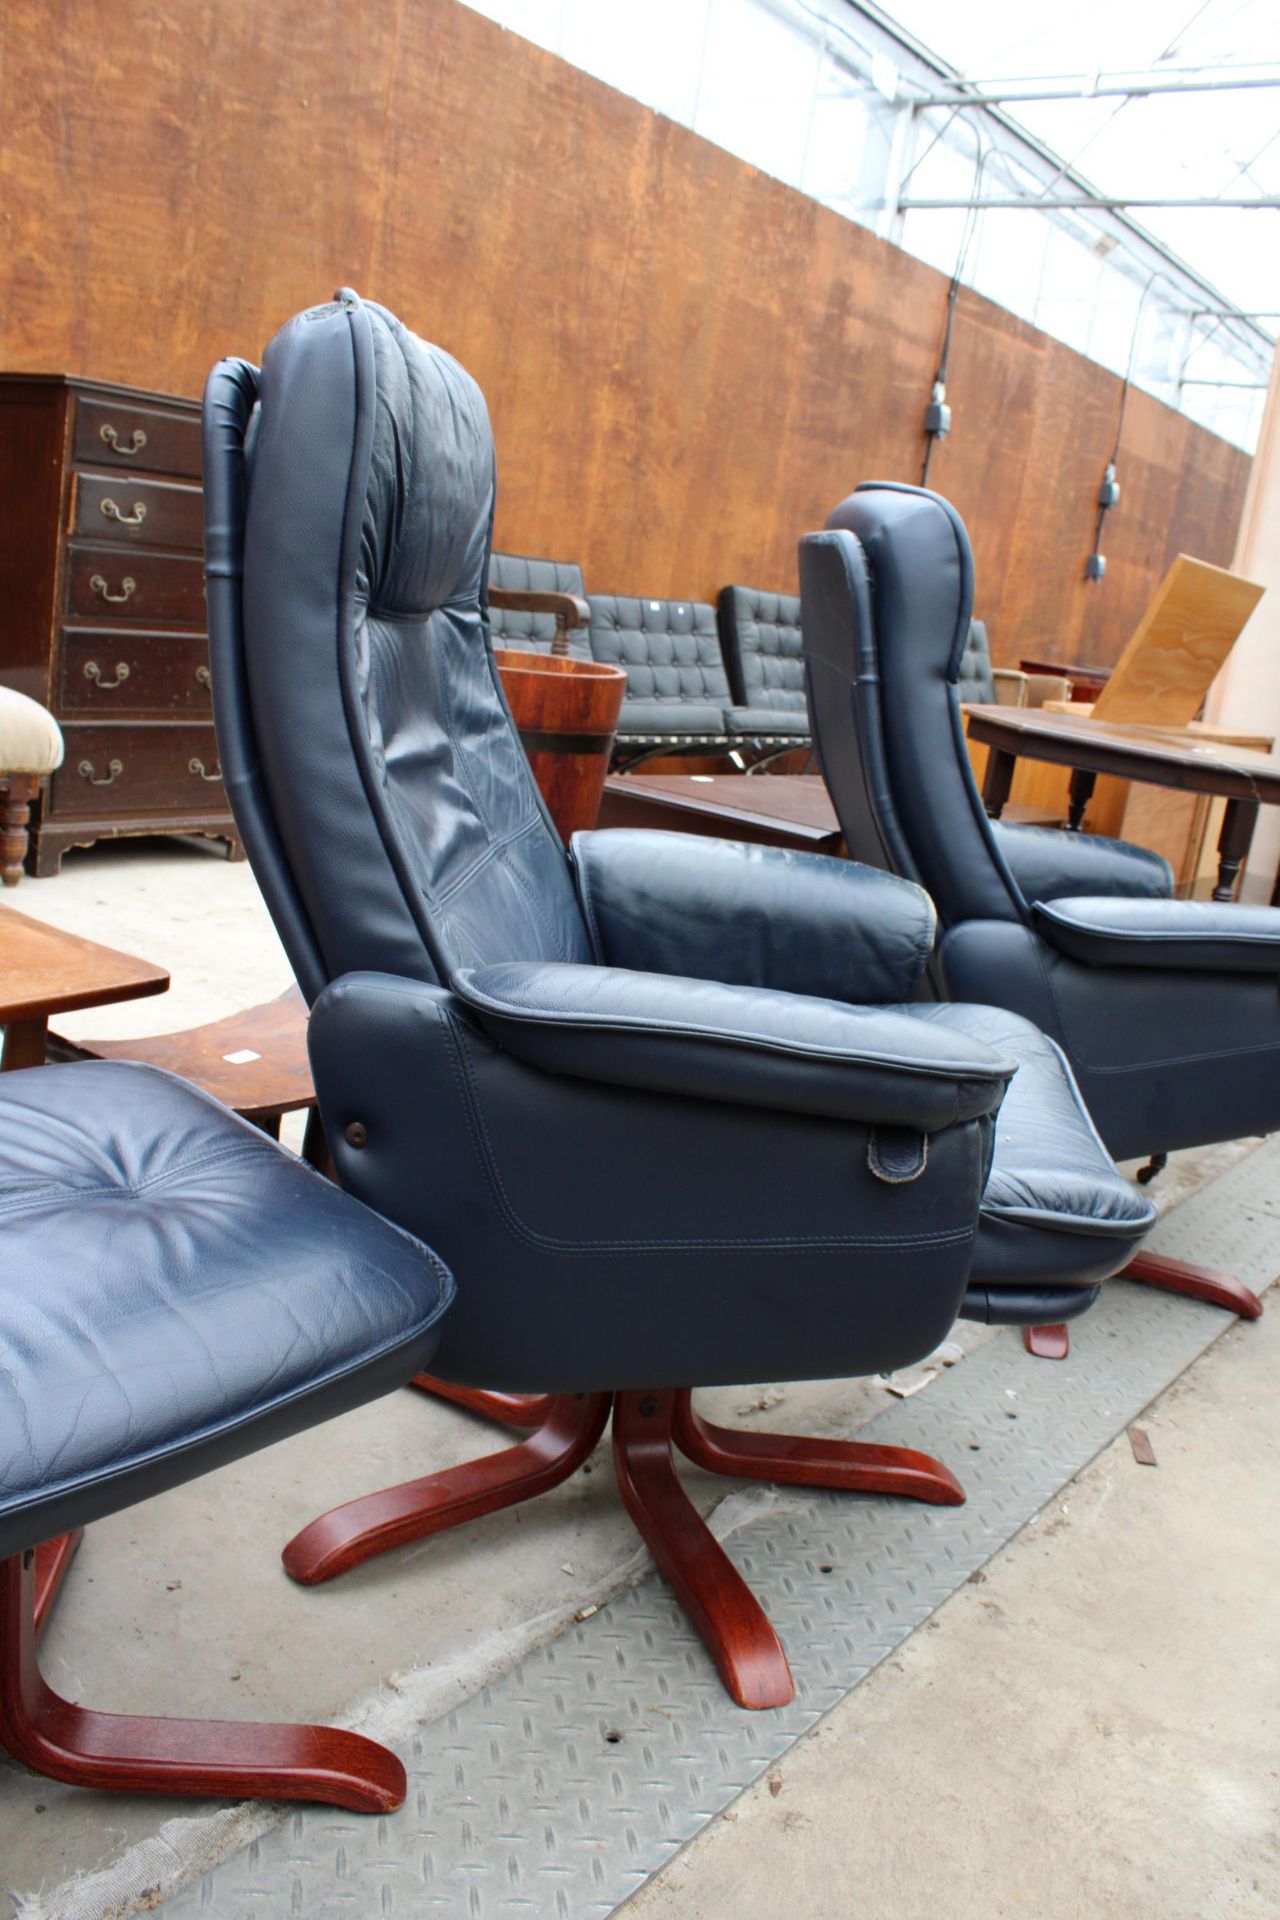 MODERN BLUE SWIVEL RECLINER AND STOOL - Image 2 of 3